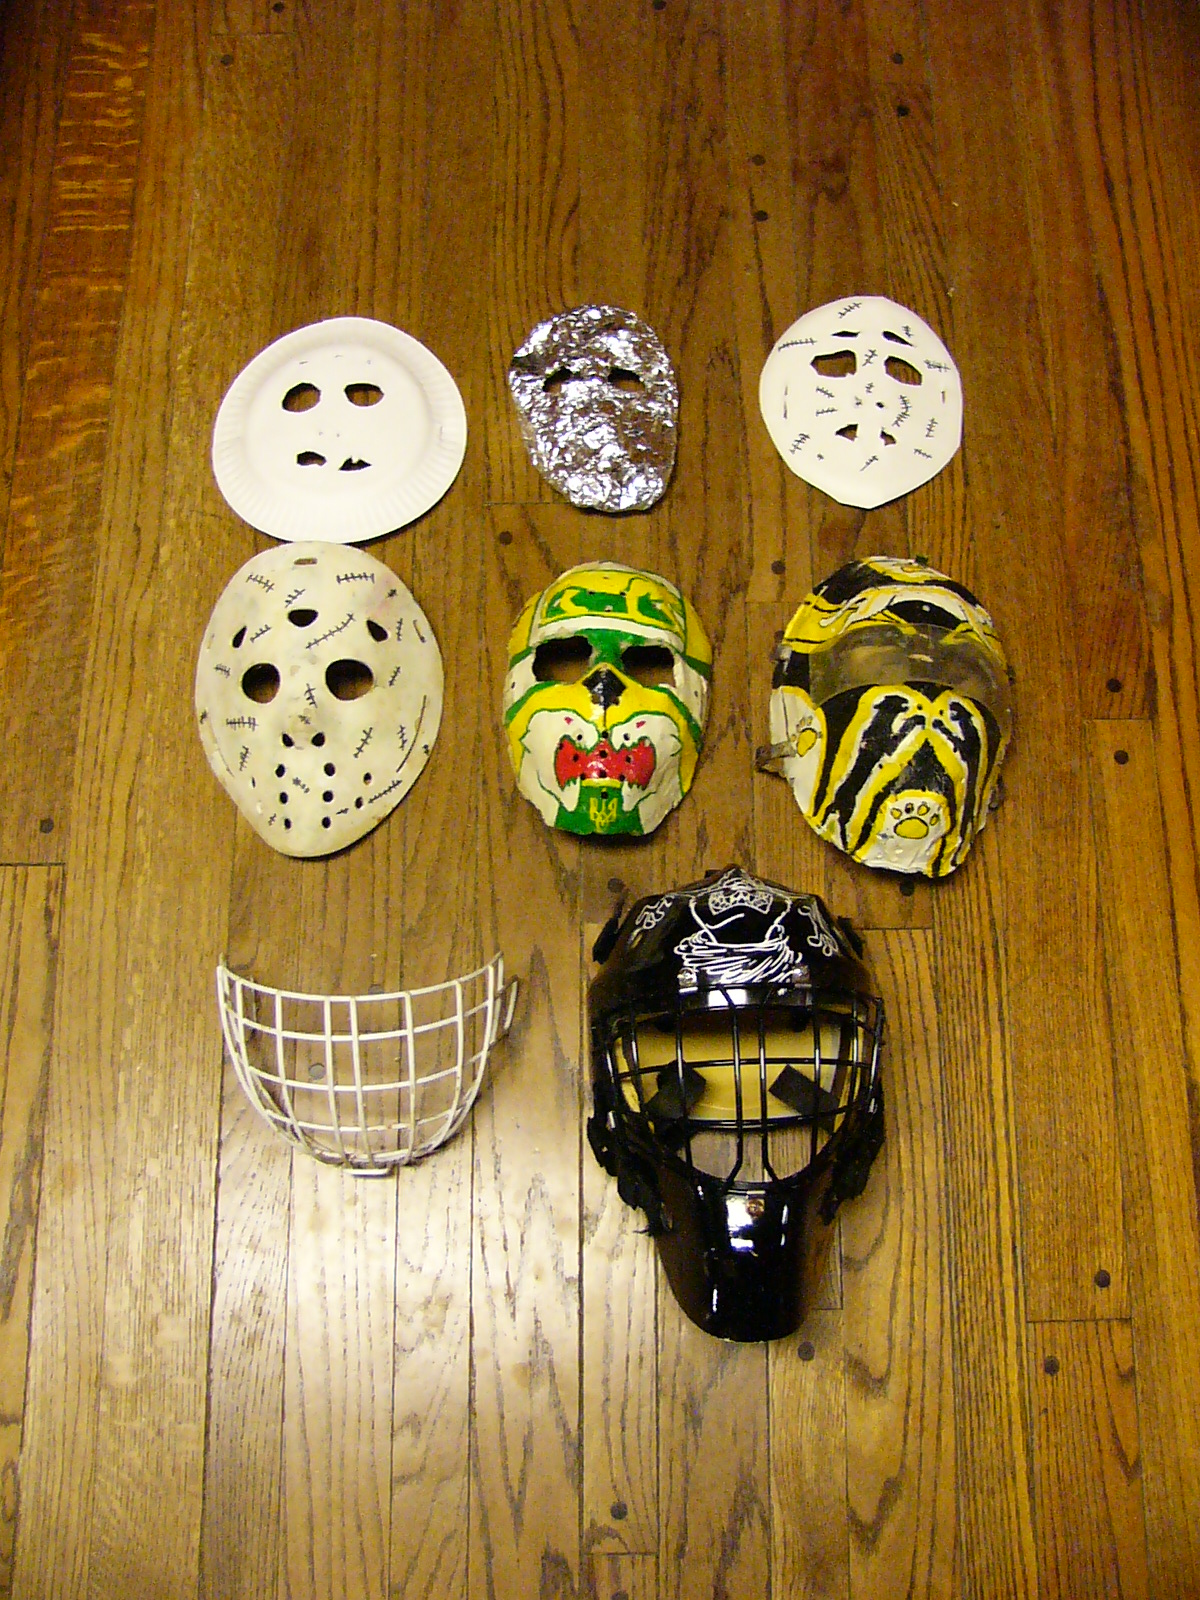 Download My Goalie Masks Through The Years | Between the Pipes